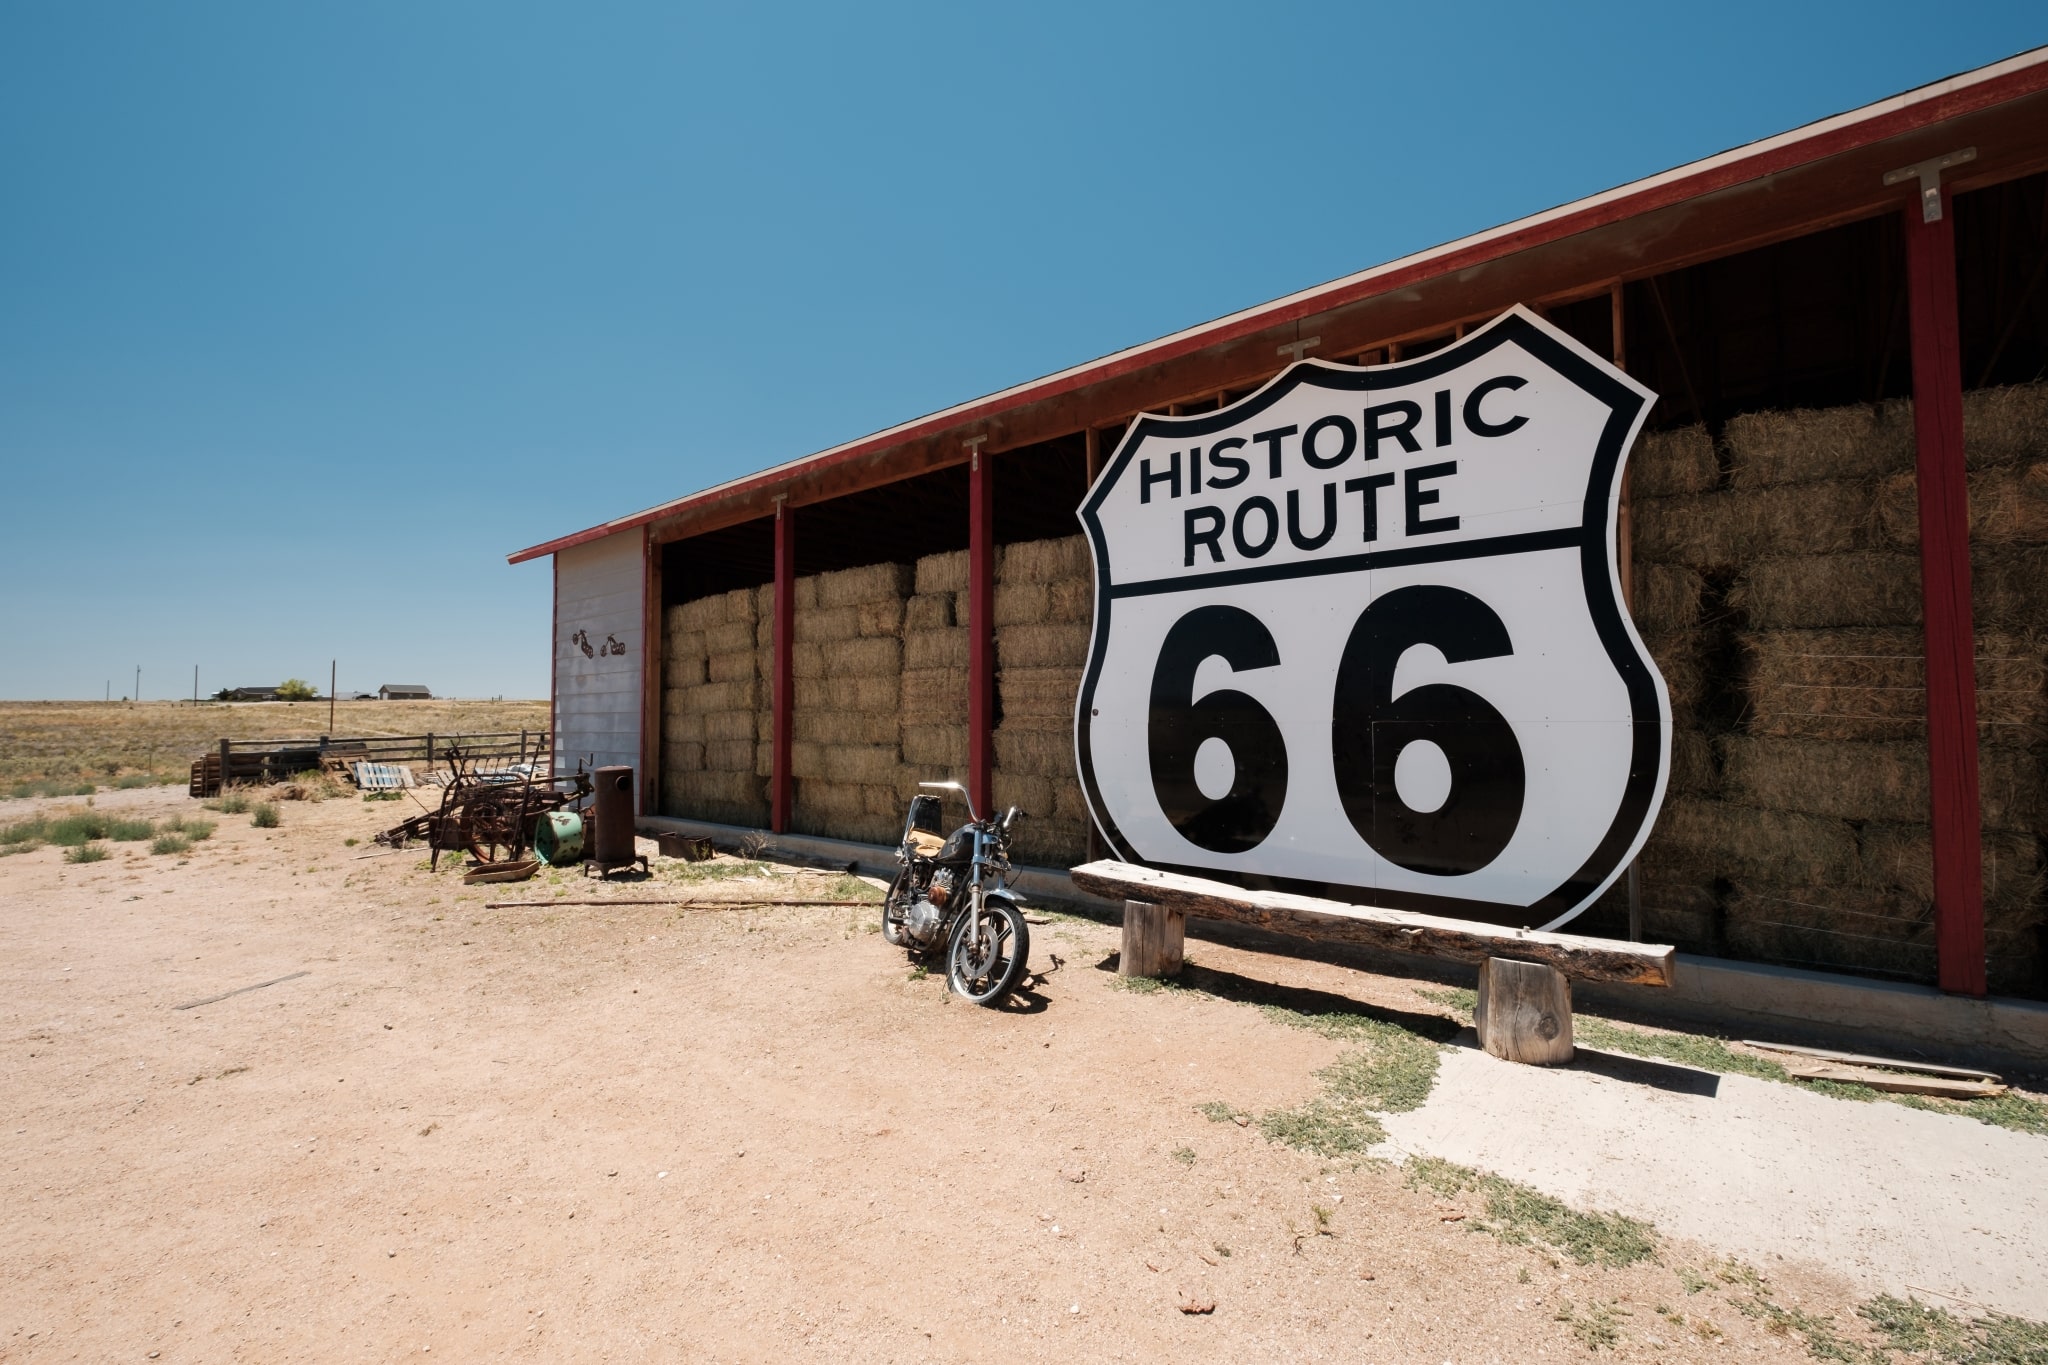 old motorcycle near historic route 66 in P6SHSLC